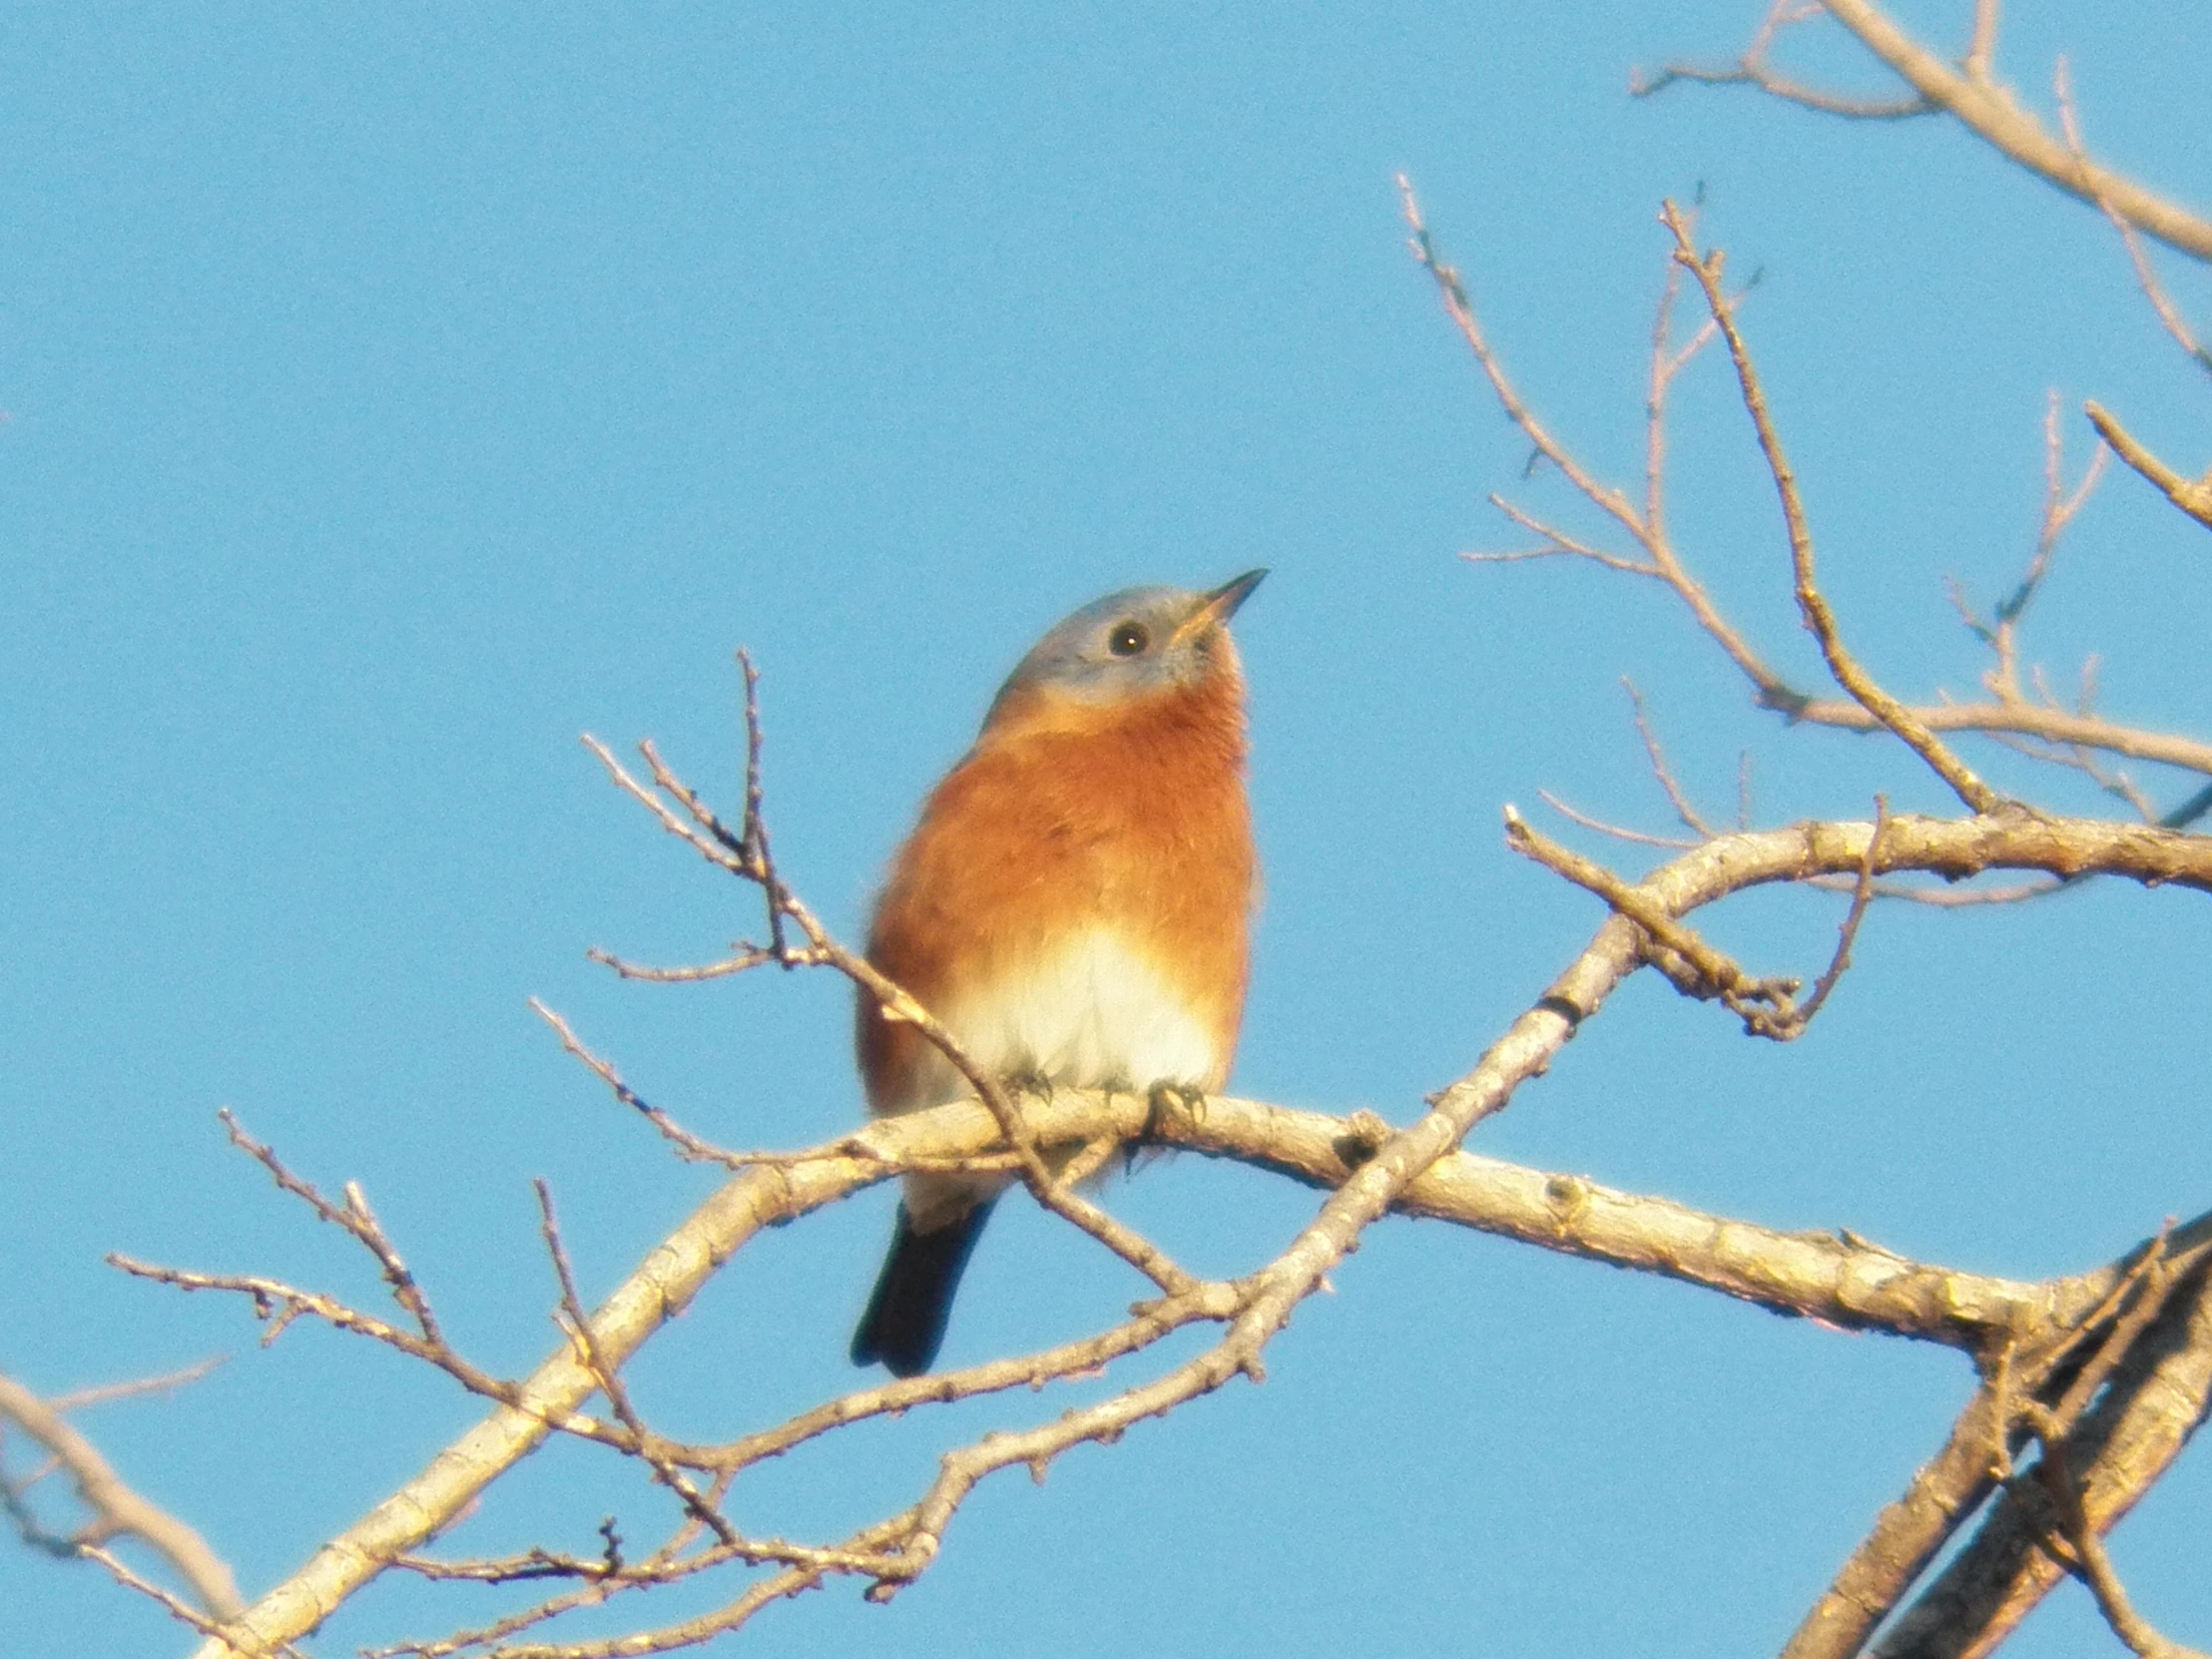 the small bird is perched on the limb of a tree